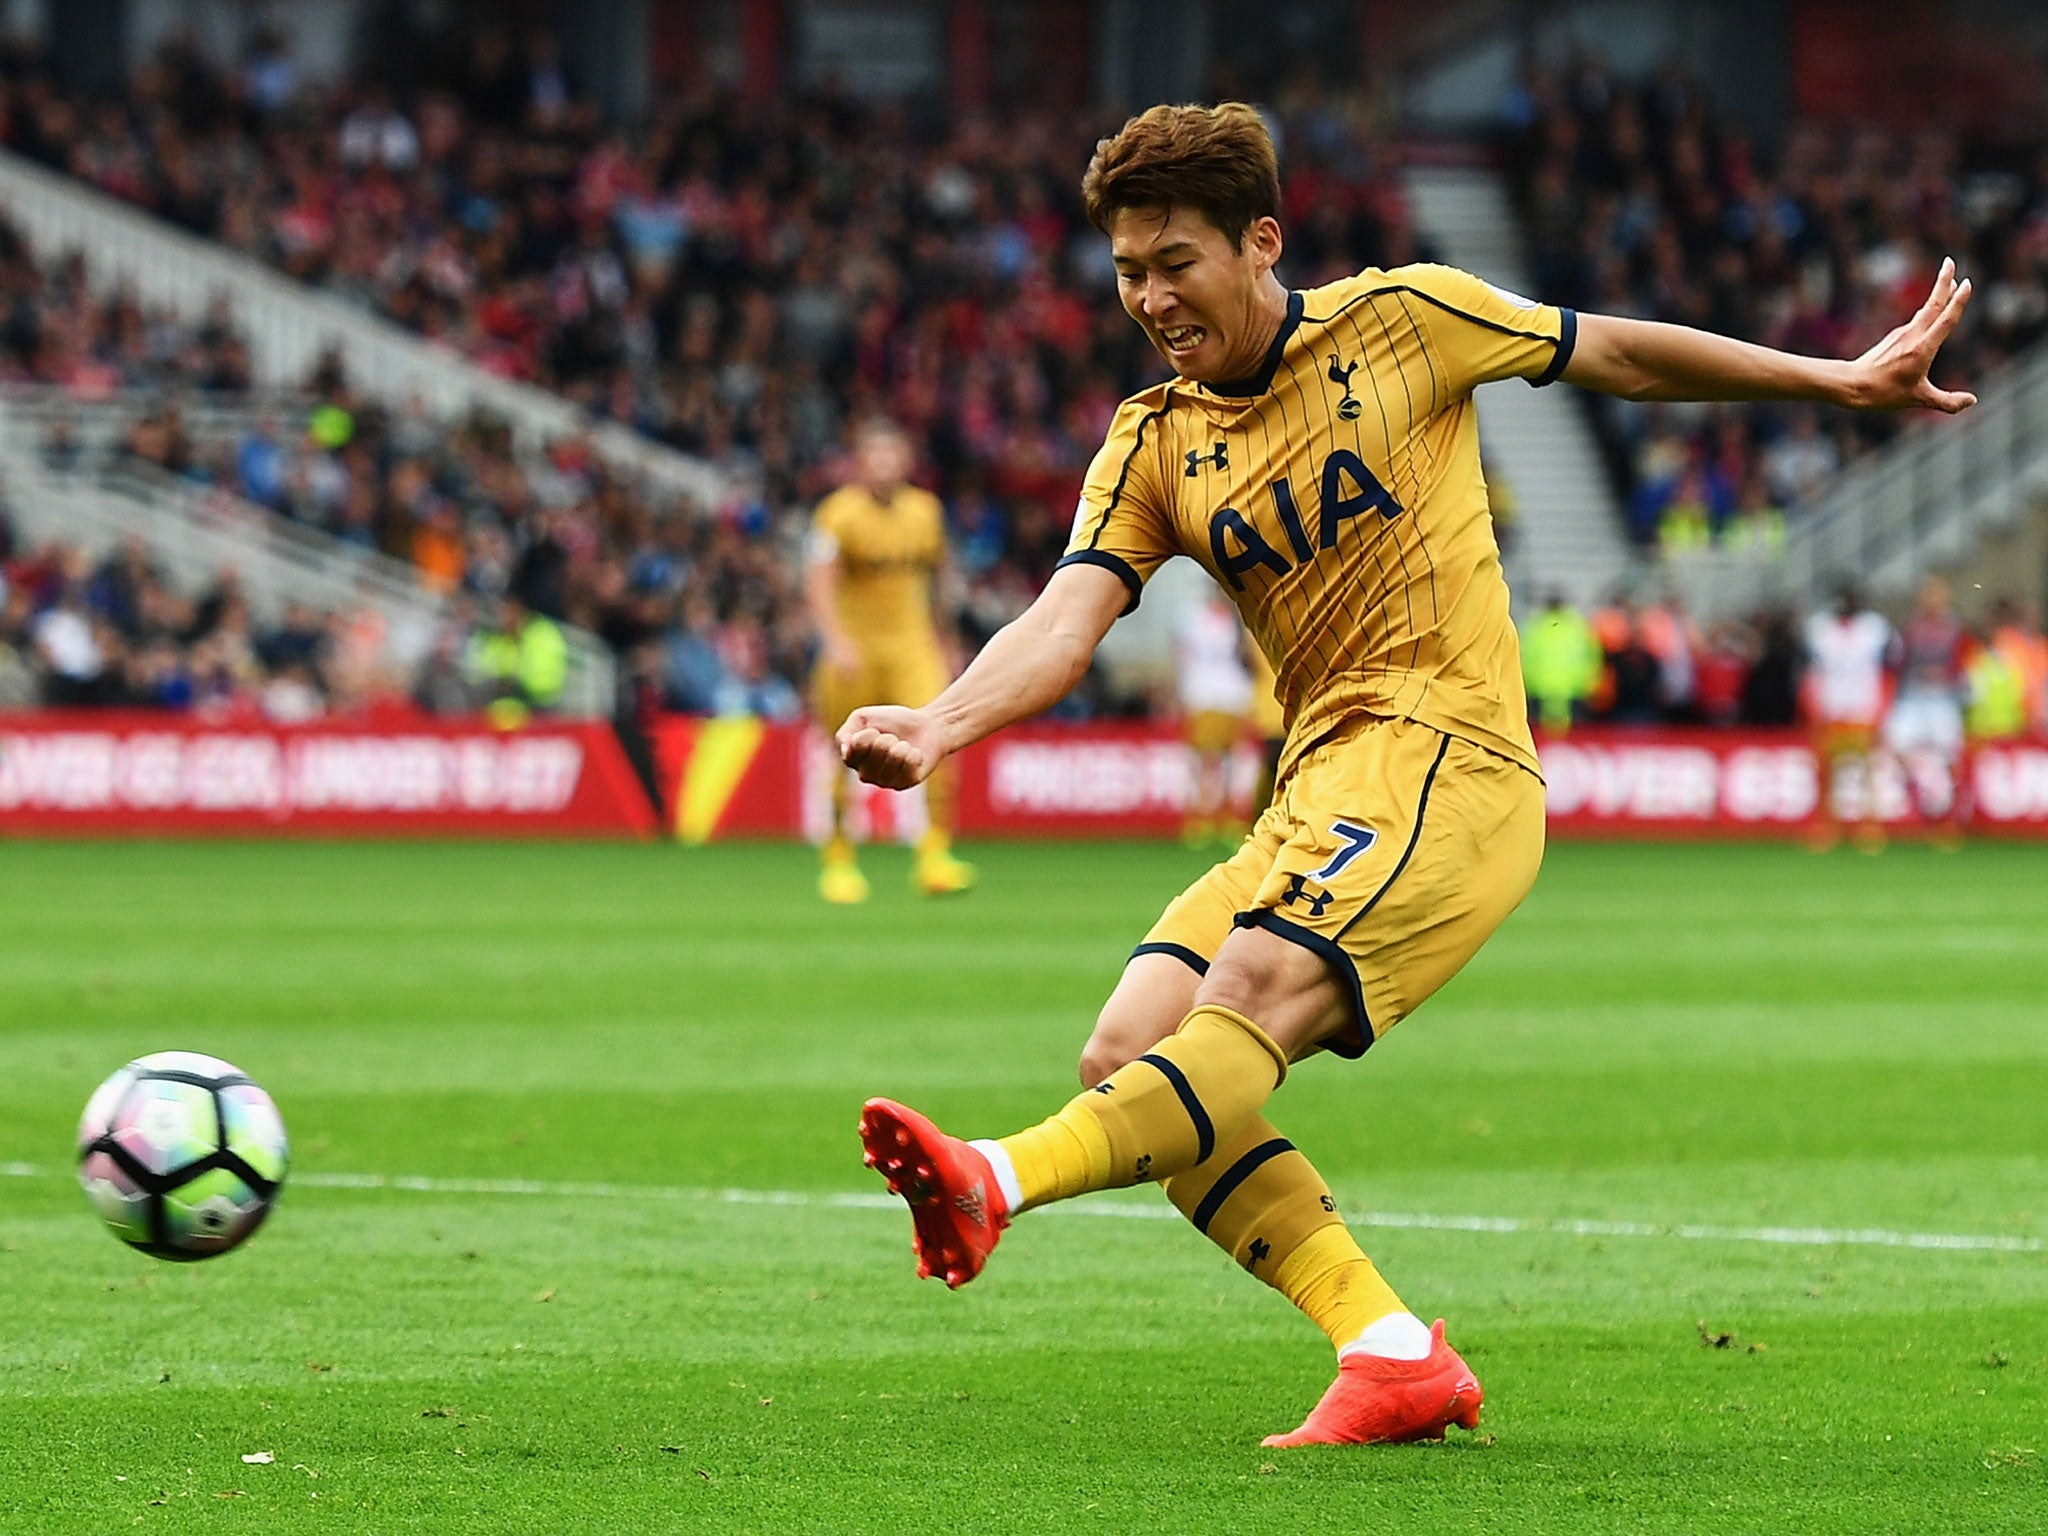 Son was in emphatic form on Saturday to hand Tottenham all three points